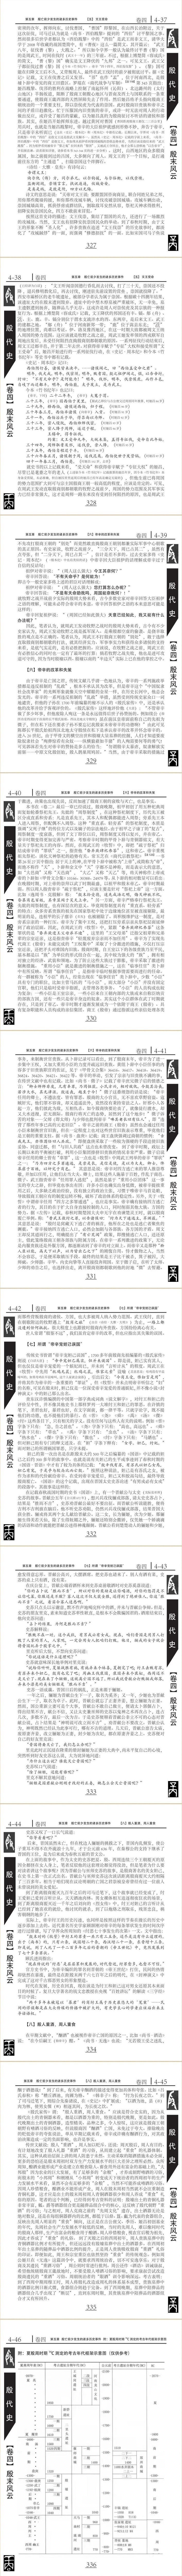 <span style='color:#FF0000;font-size:16px;font-style:none;font-weight:bold;text-decoration:none'>10_《殷代史》之十：卷四</span>